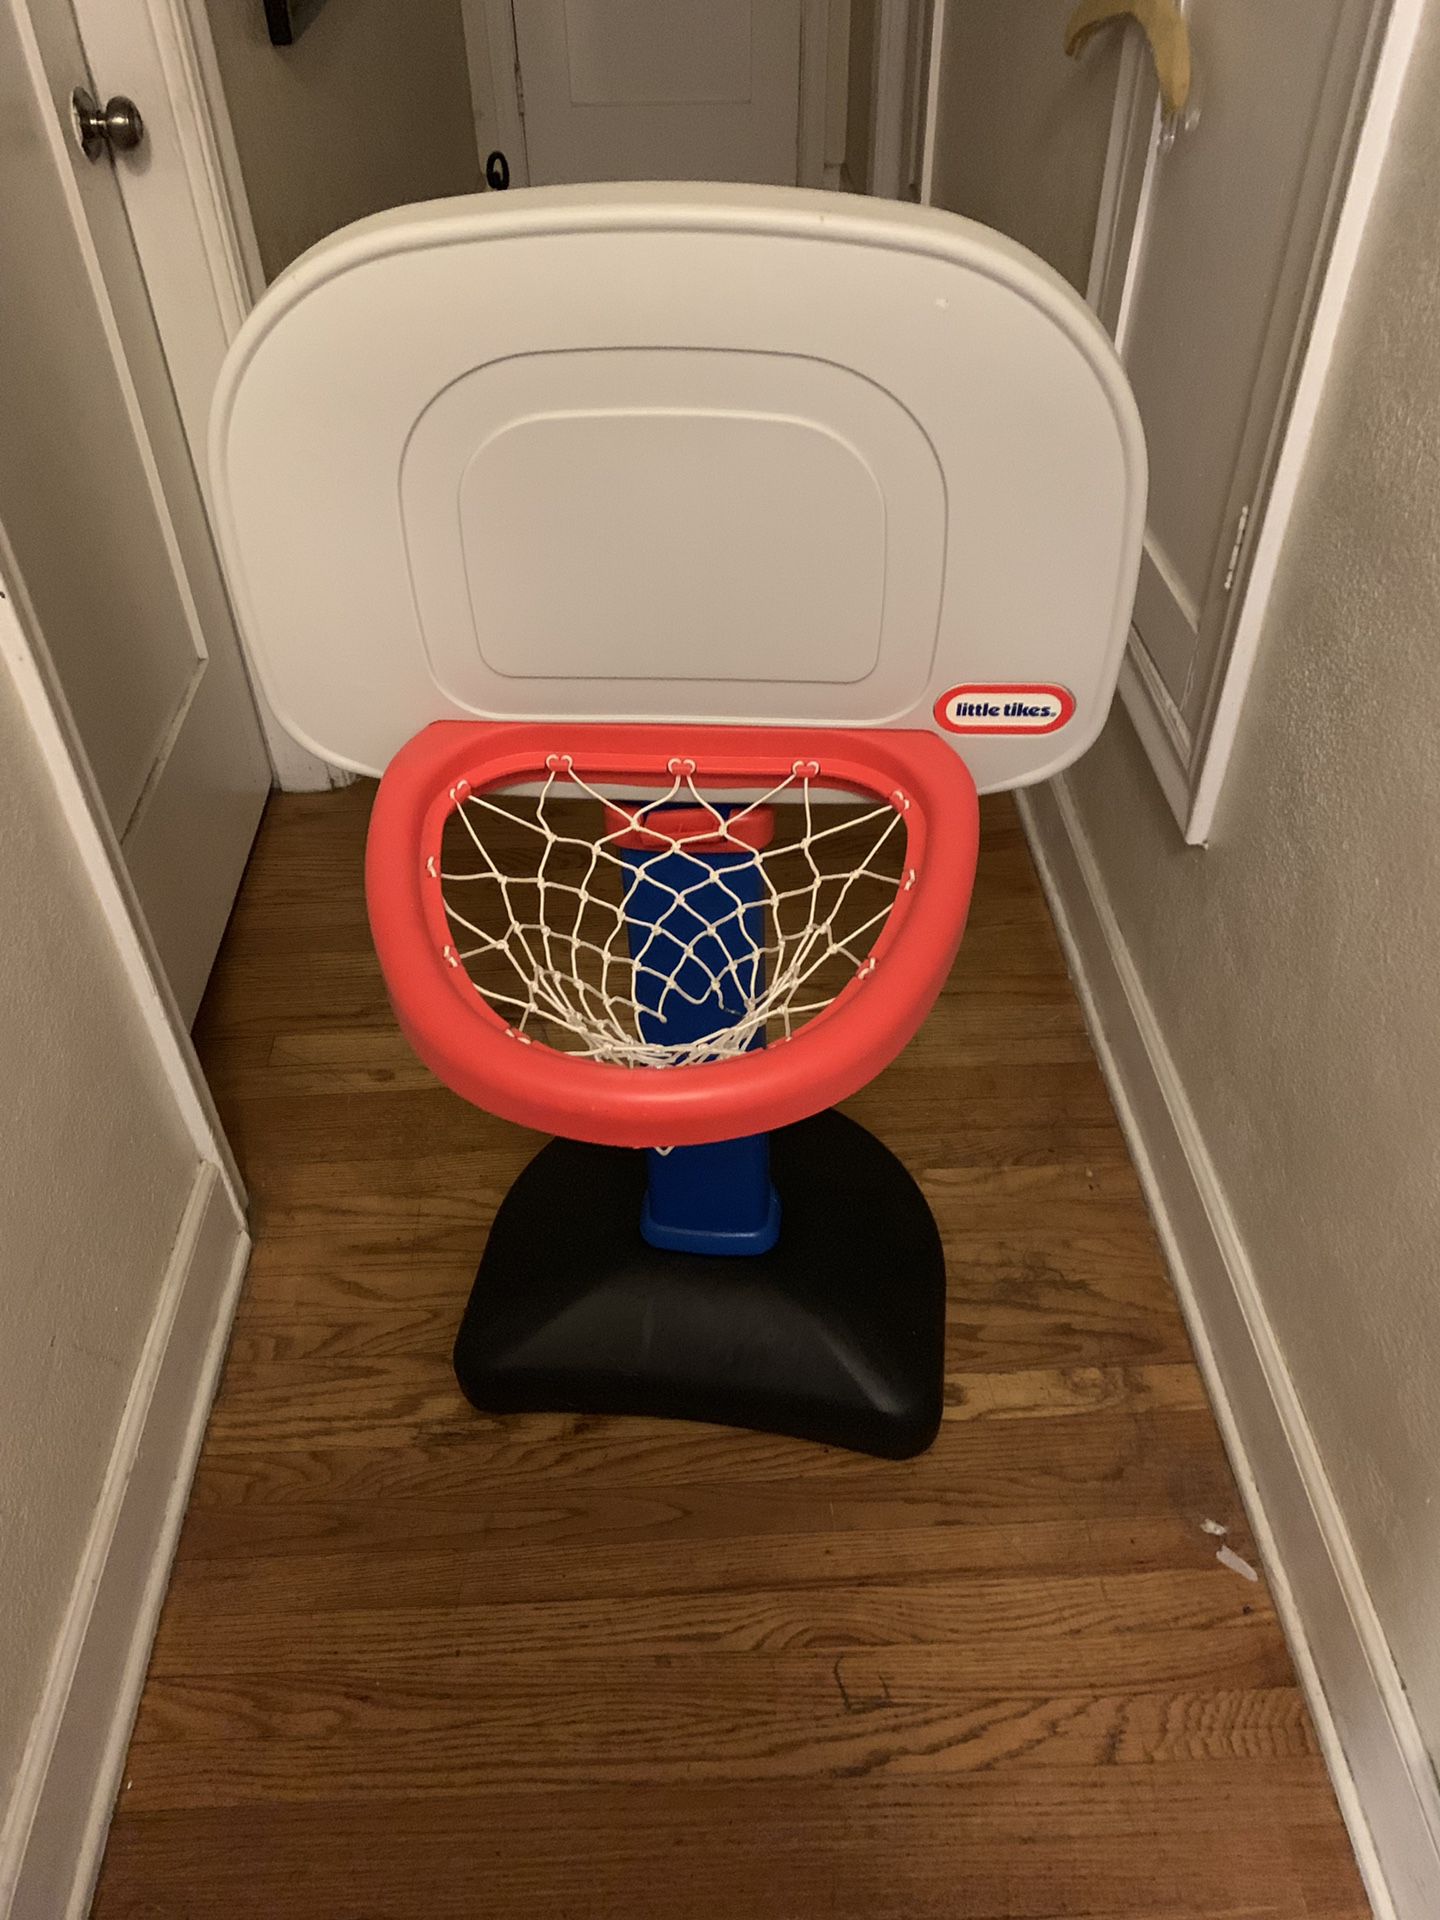 Basketball hoop new condition